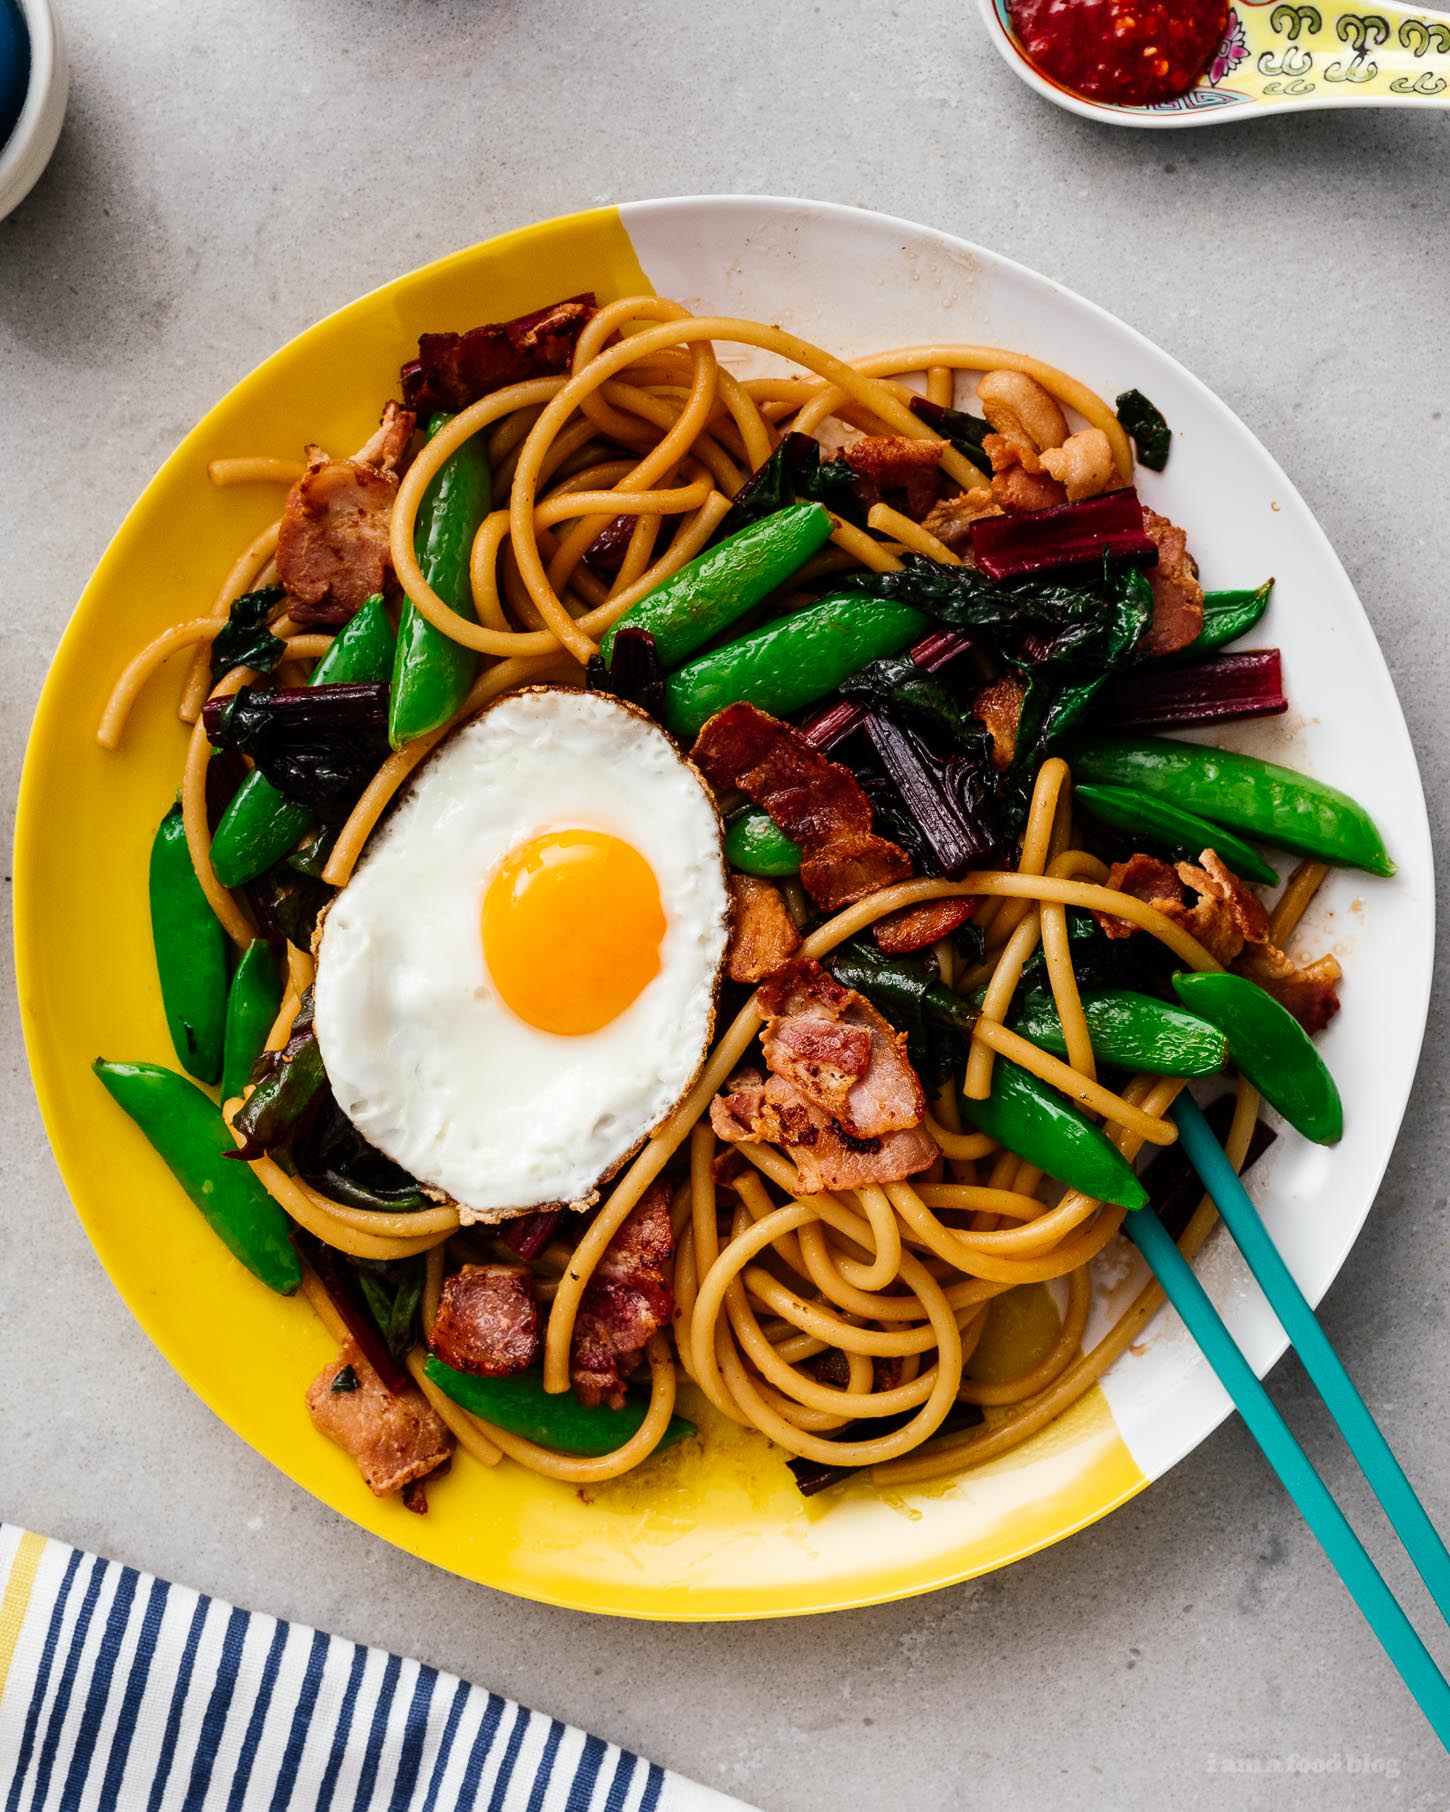 Do you love breakfast for dinner? Noodles? This bacon and egg stir fry lo mein is for you! Quick, easy, and delicious #bacon #eggs #recipes #dinner #easy